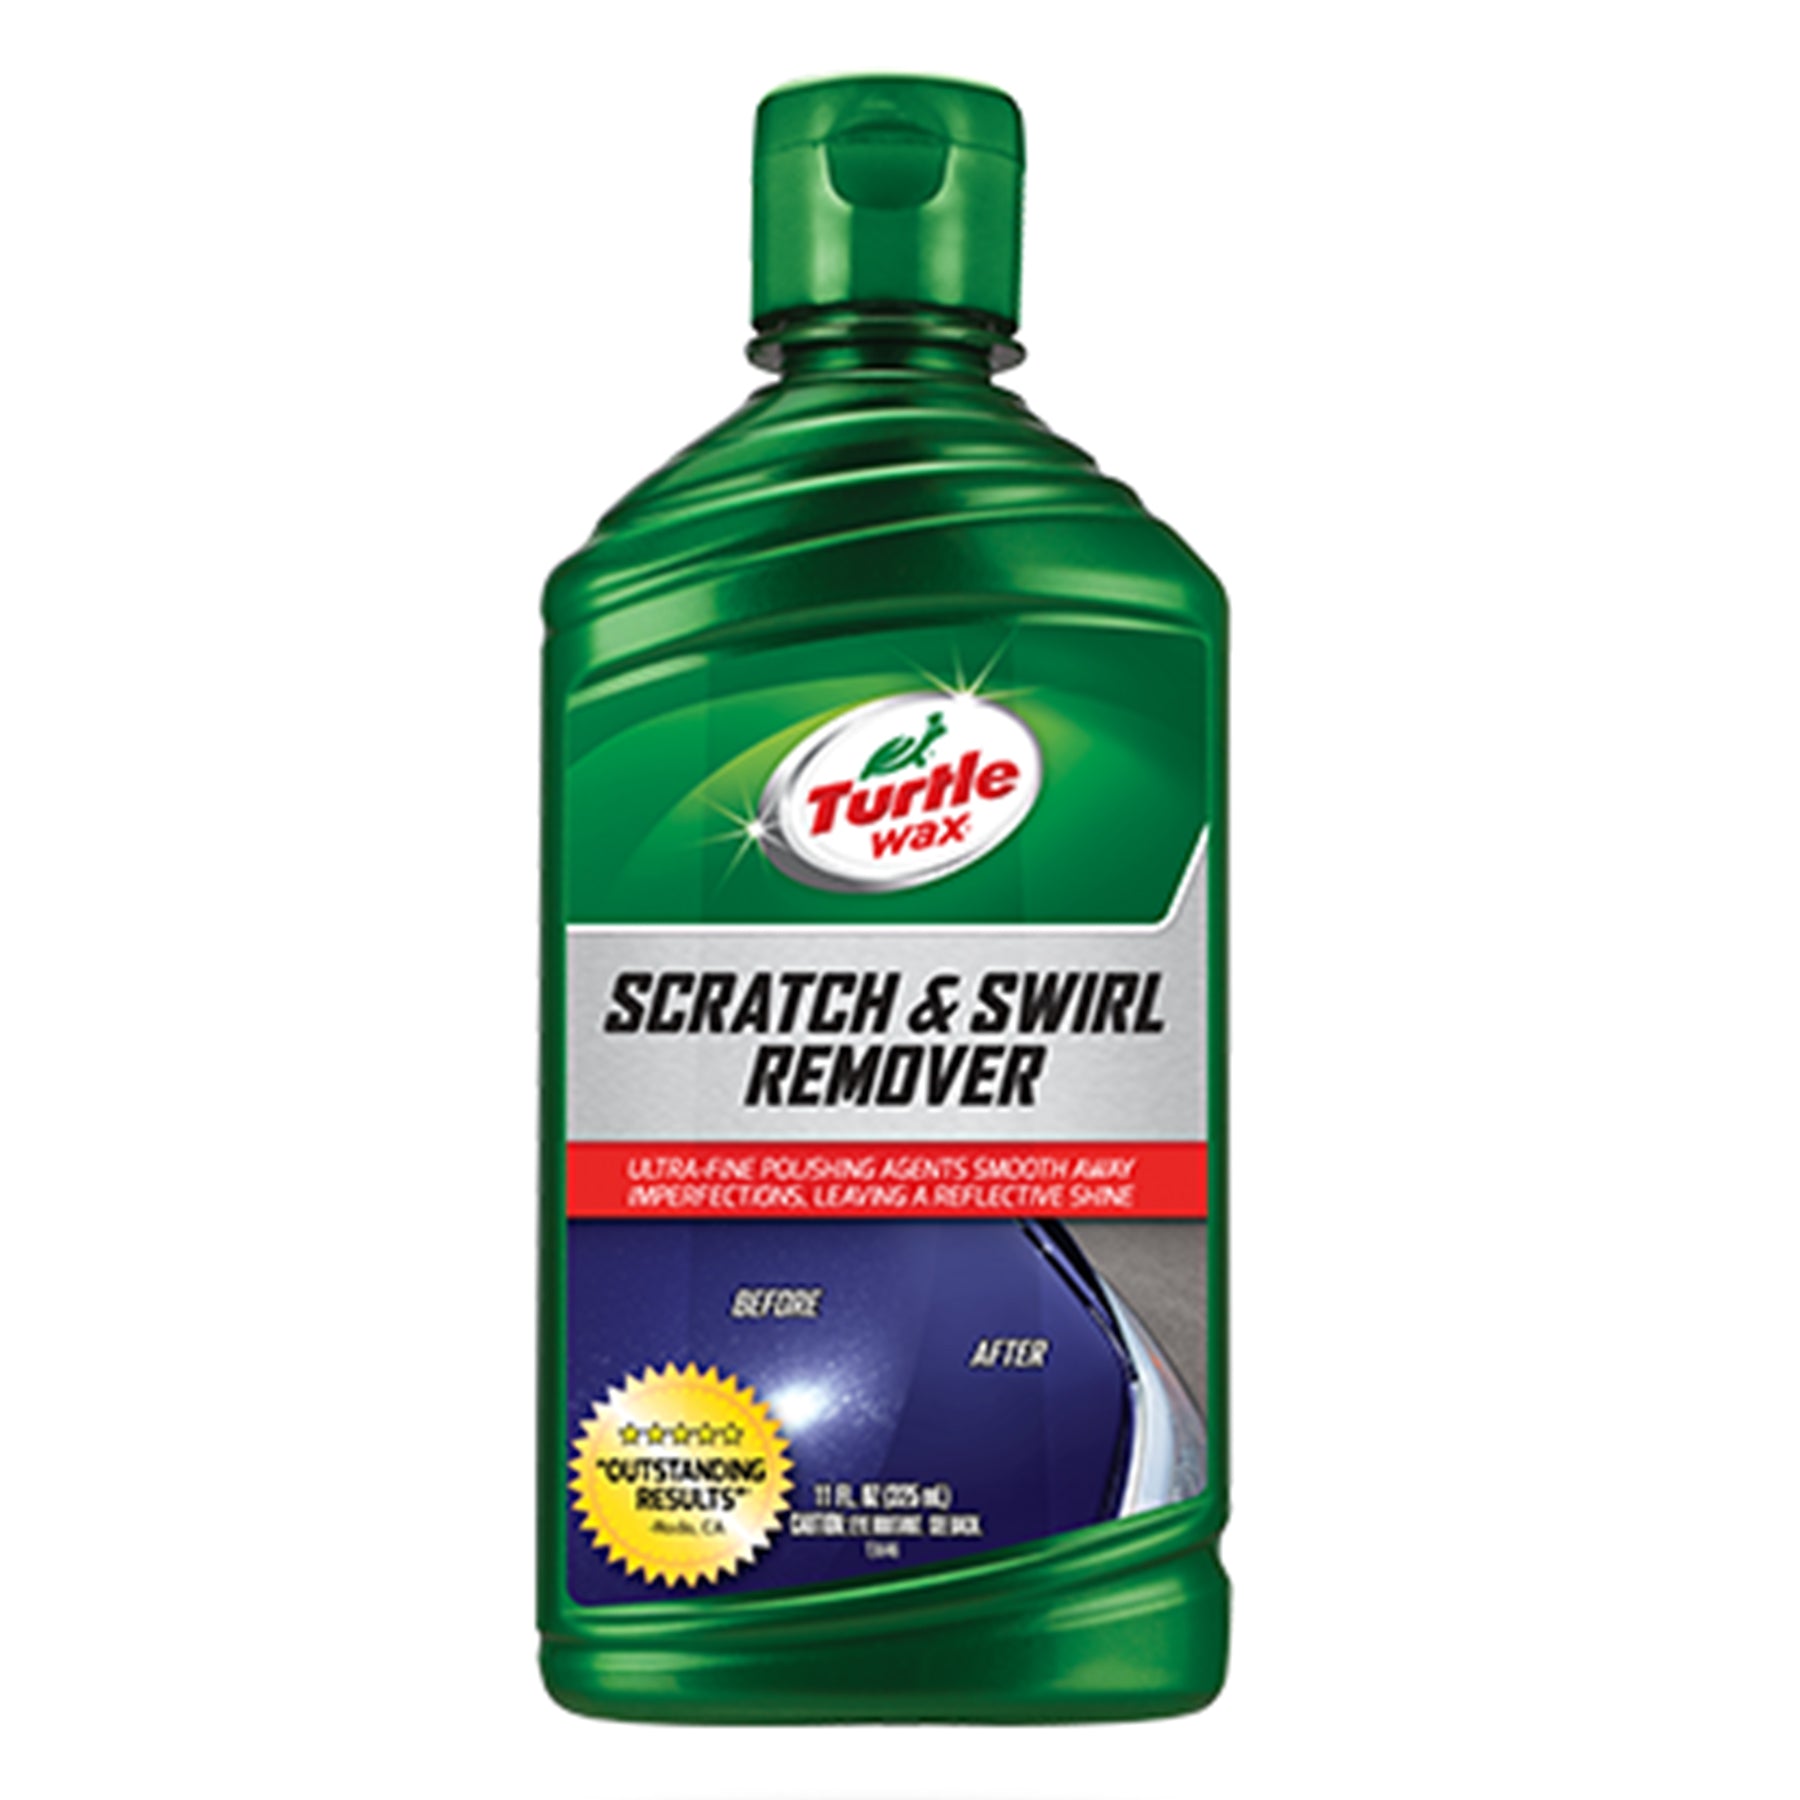 Scratch and swirl removerWeight: 225 ml